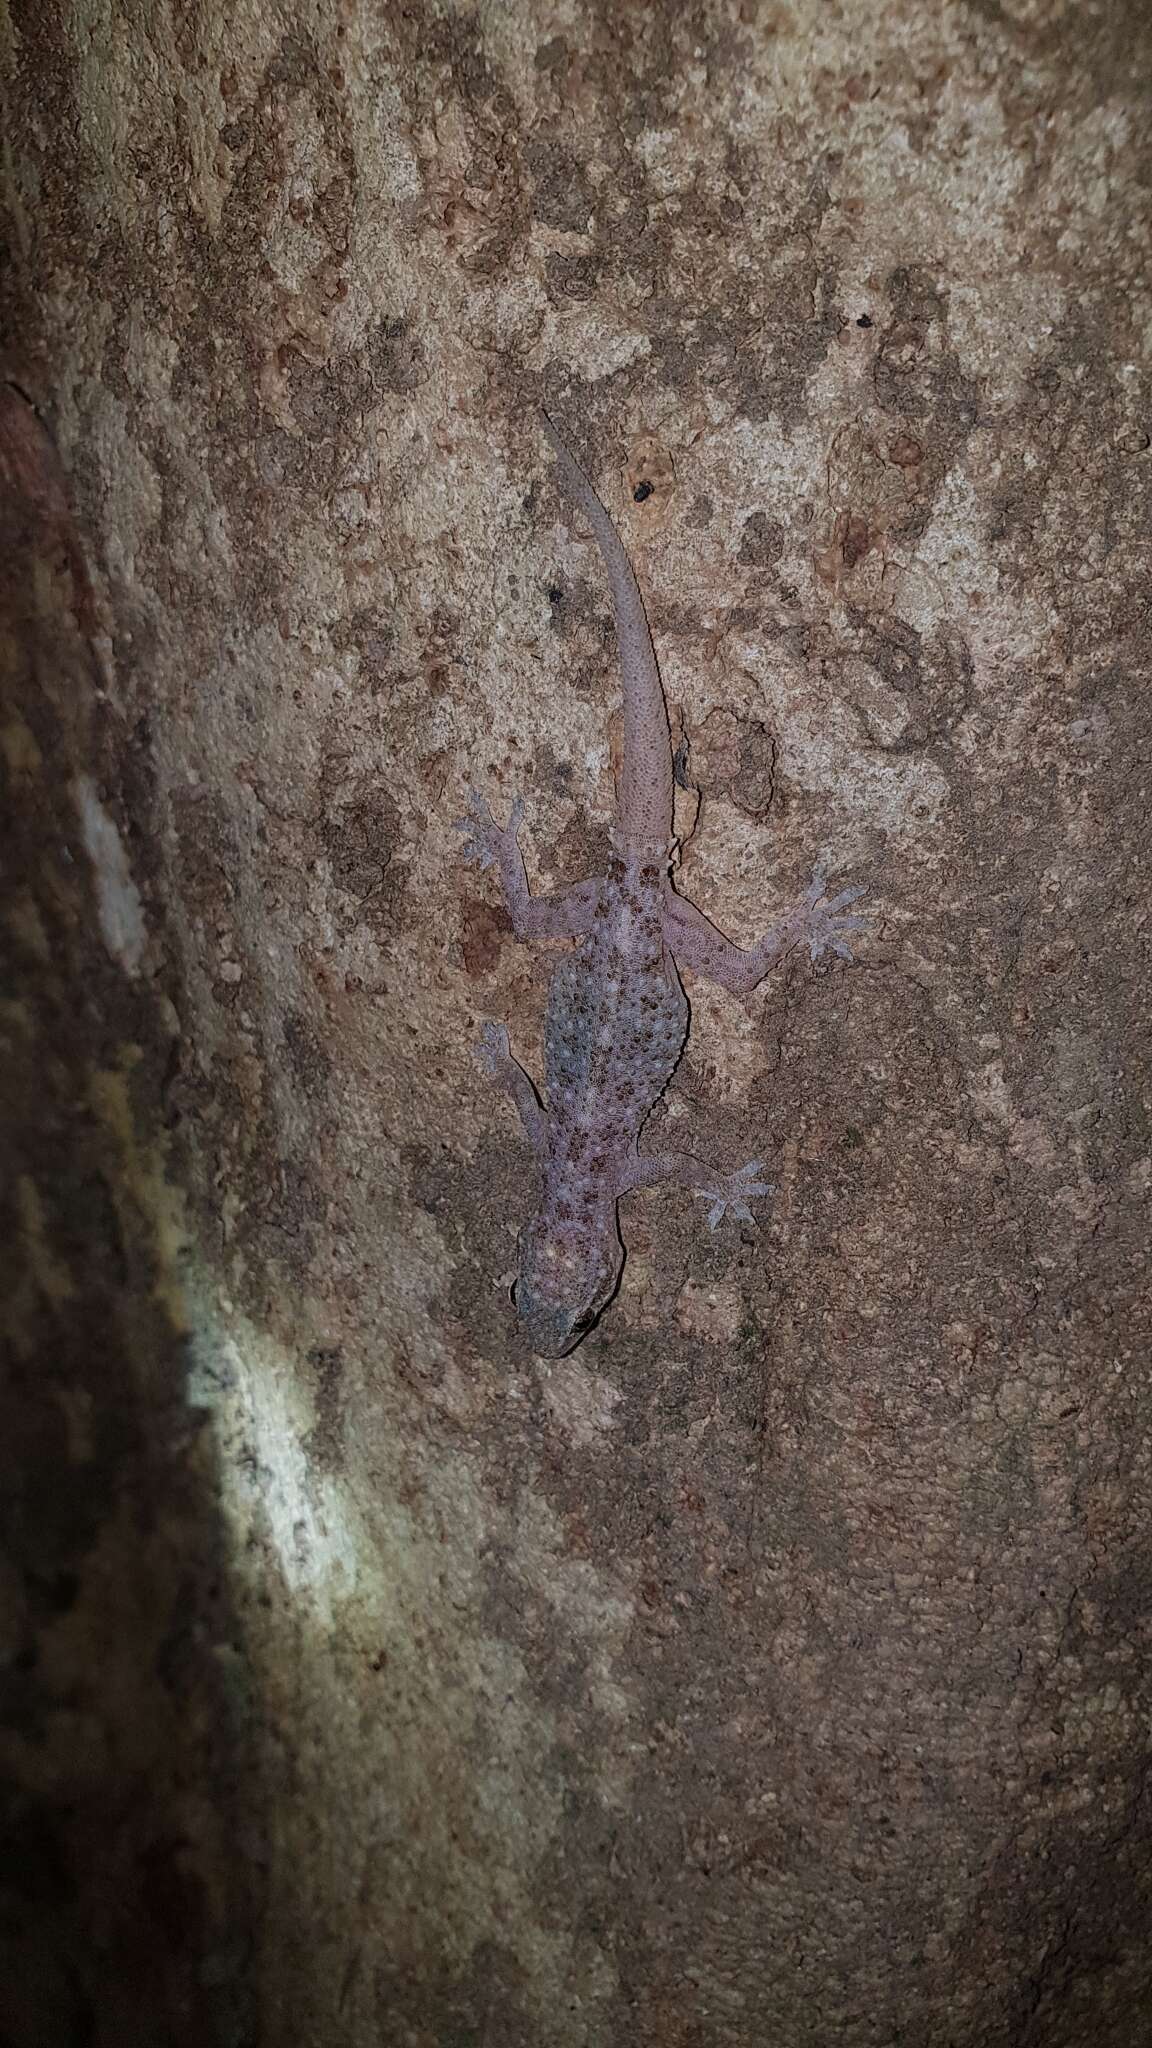 Image of Brook's House Gecko